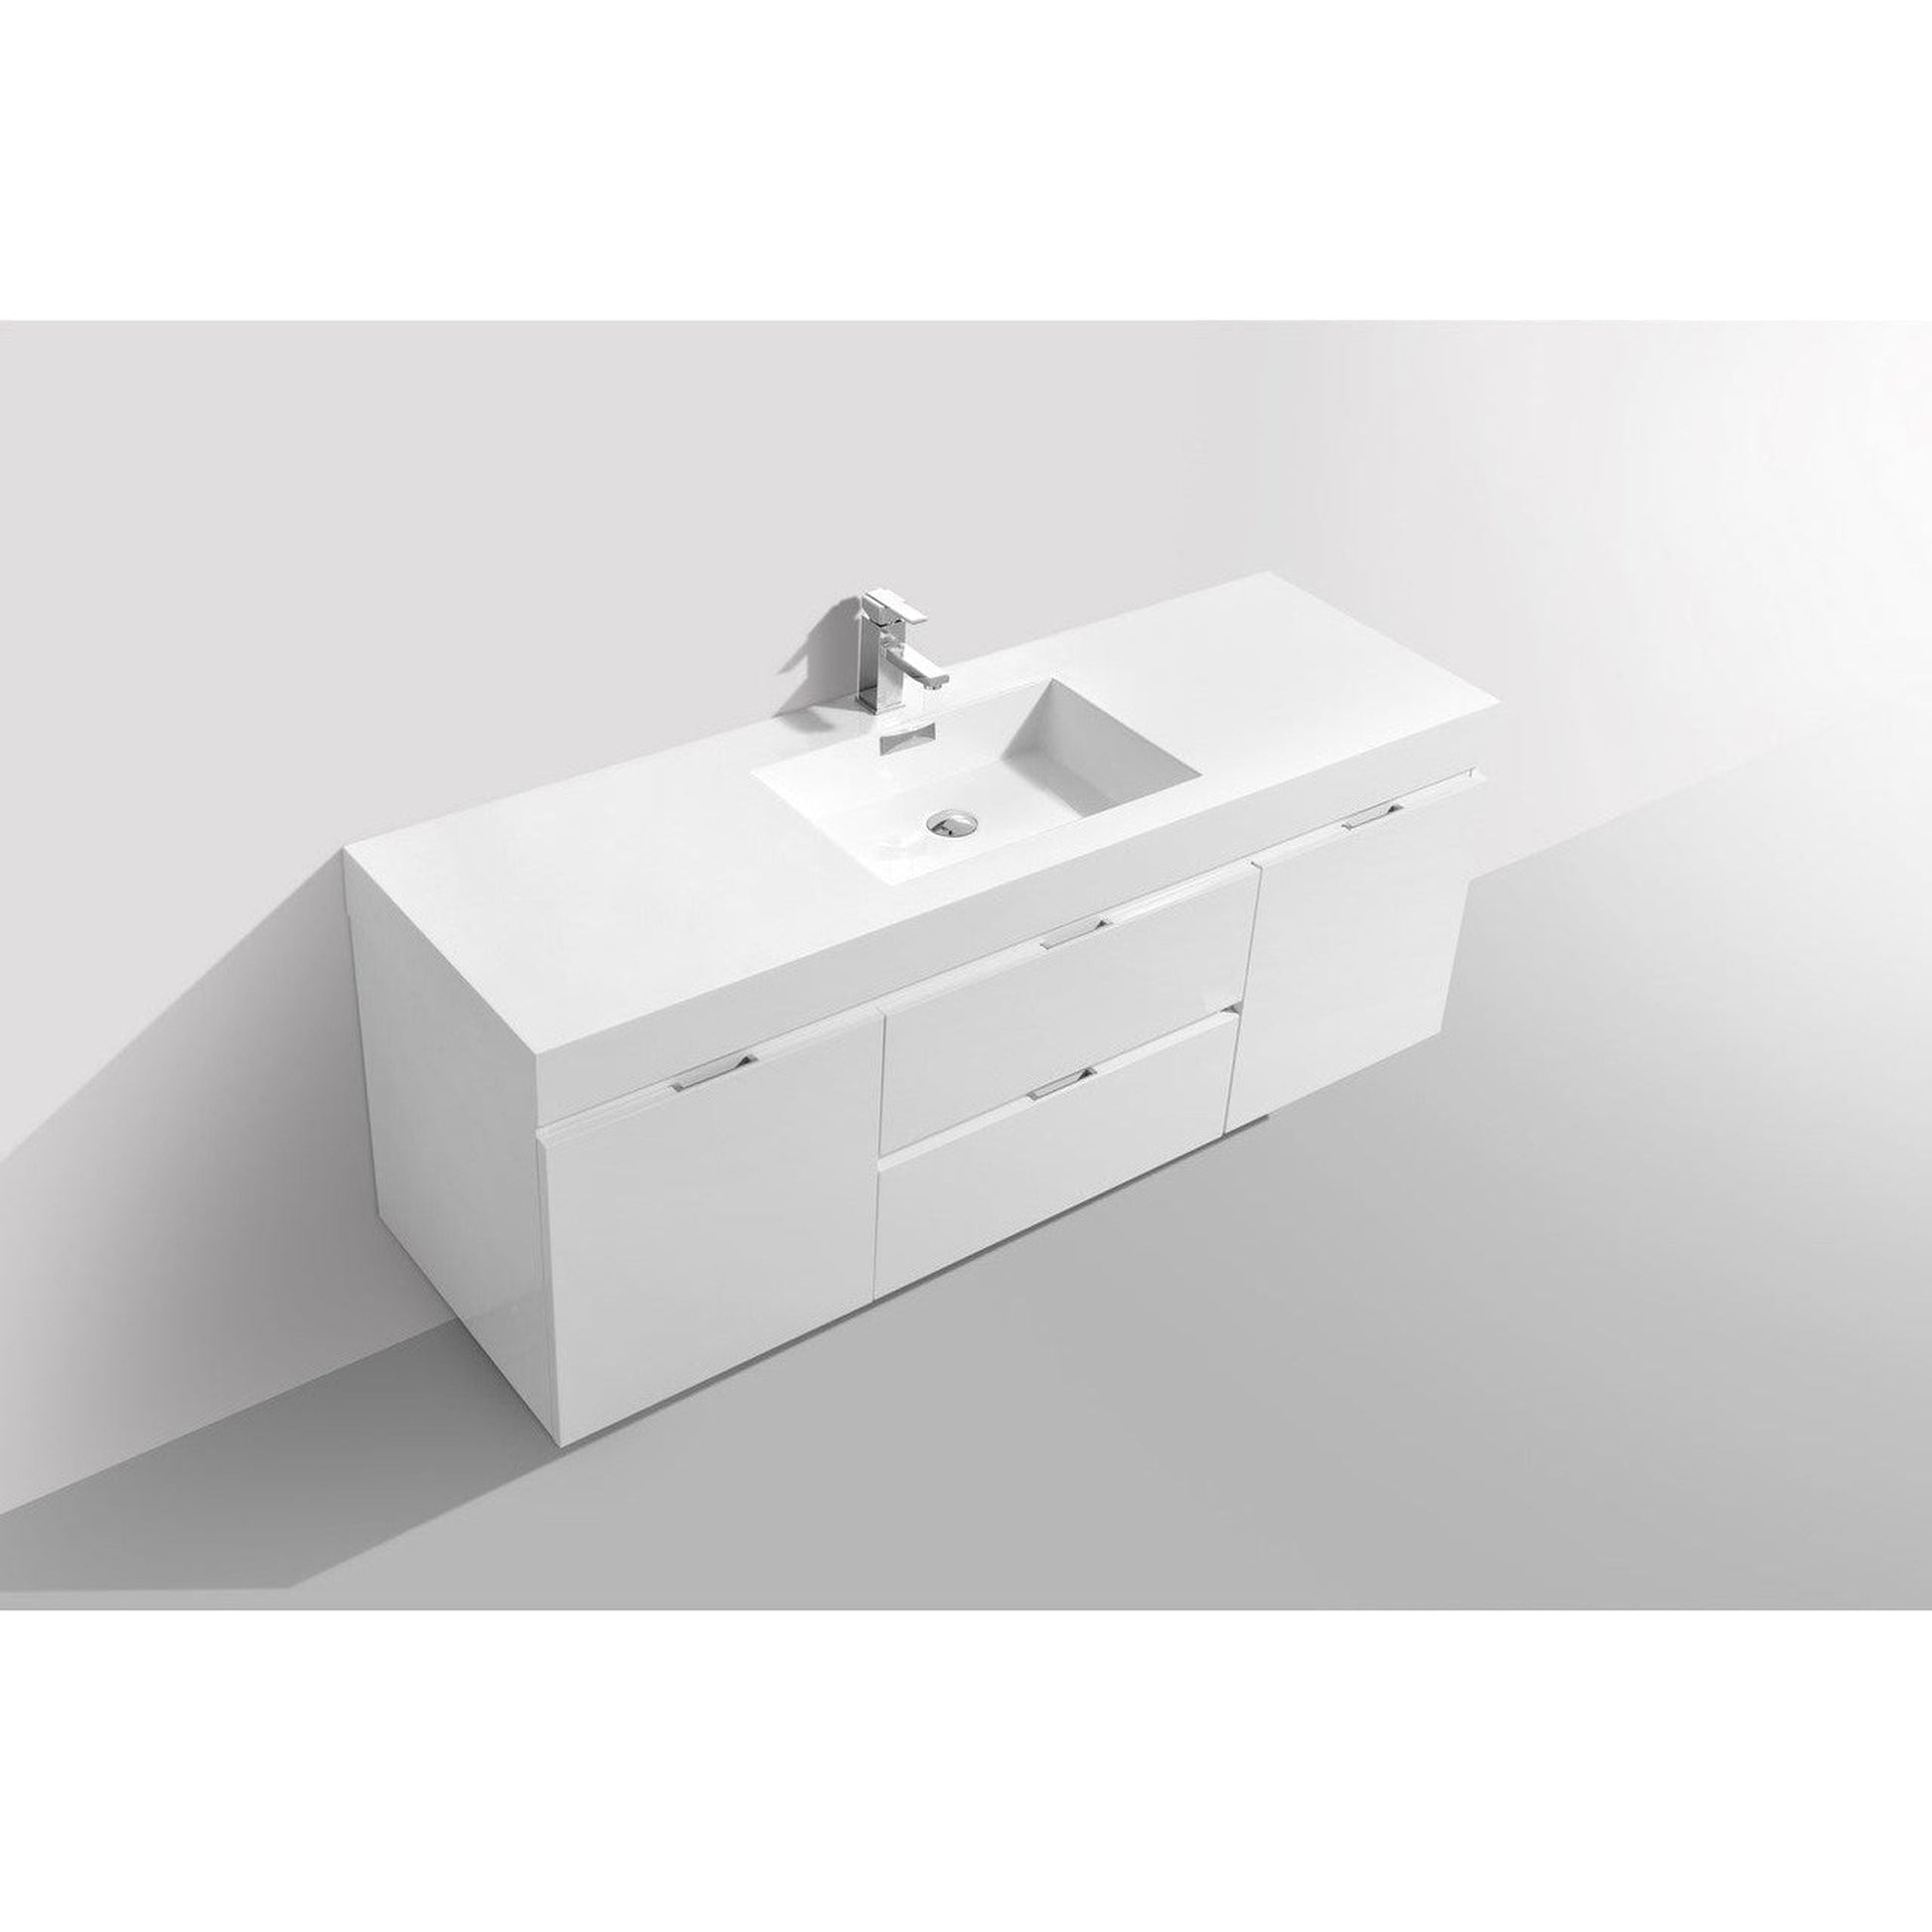 KubeBath Bliss 60" High Gloss White Wall-Mounted Modern Bathroom Vanity With Single Integrated Acrylic Sink With Overflow